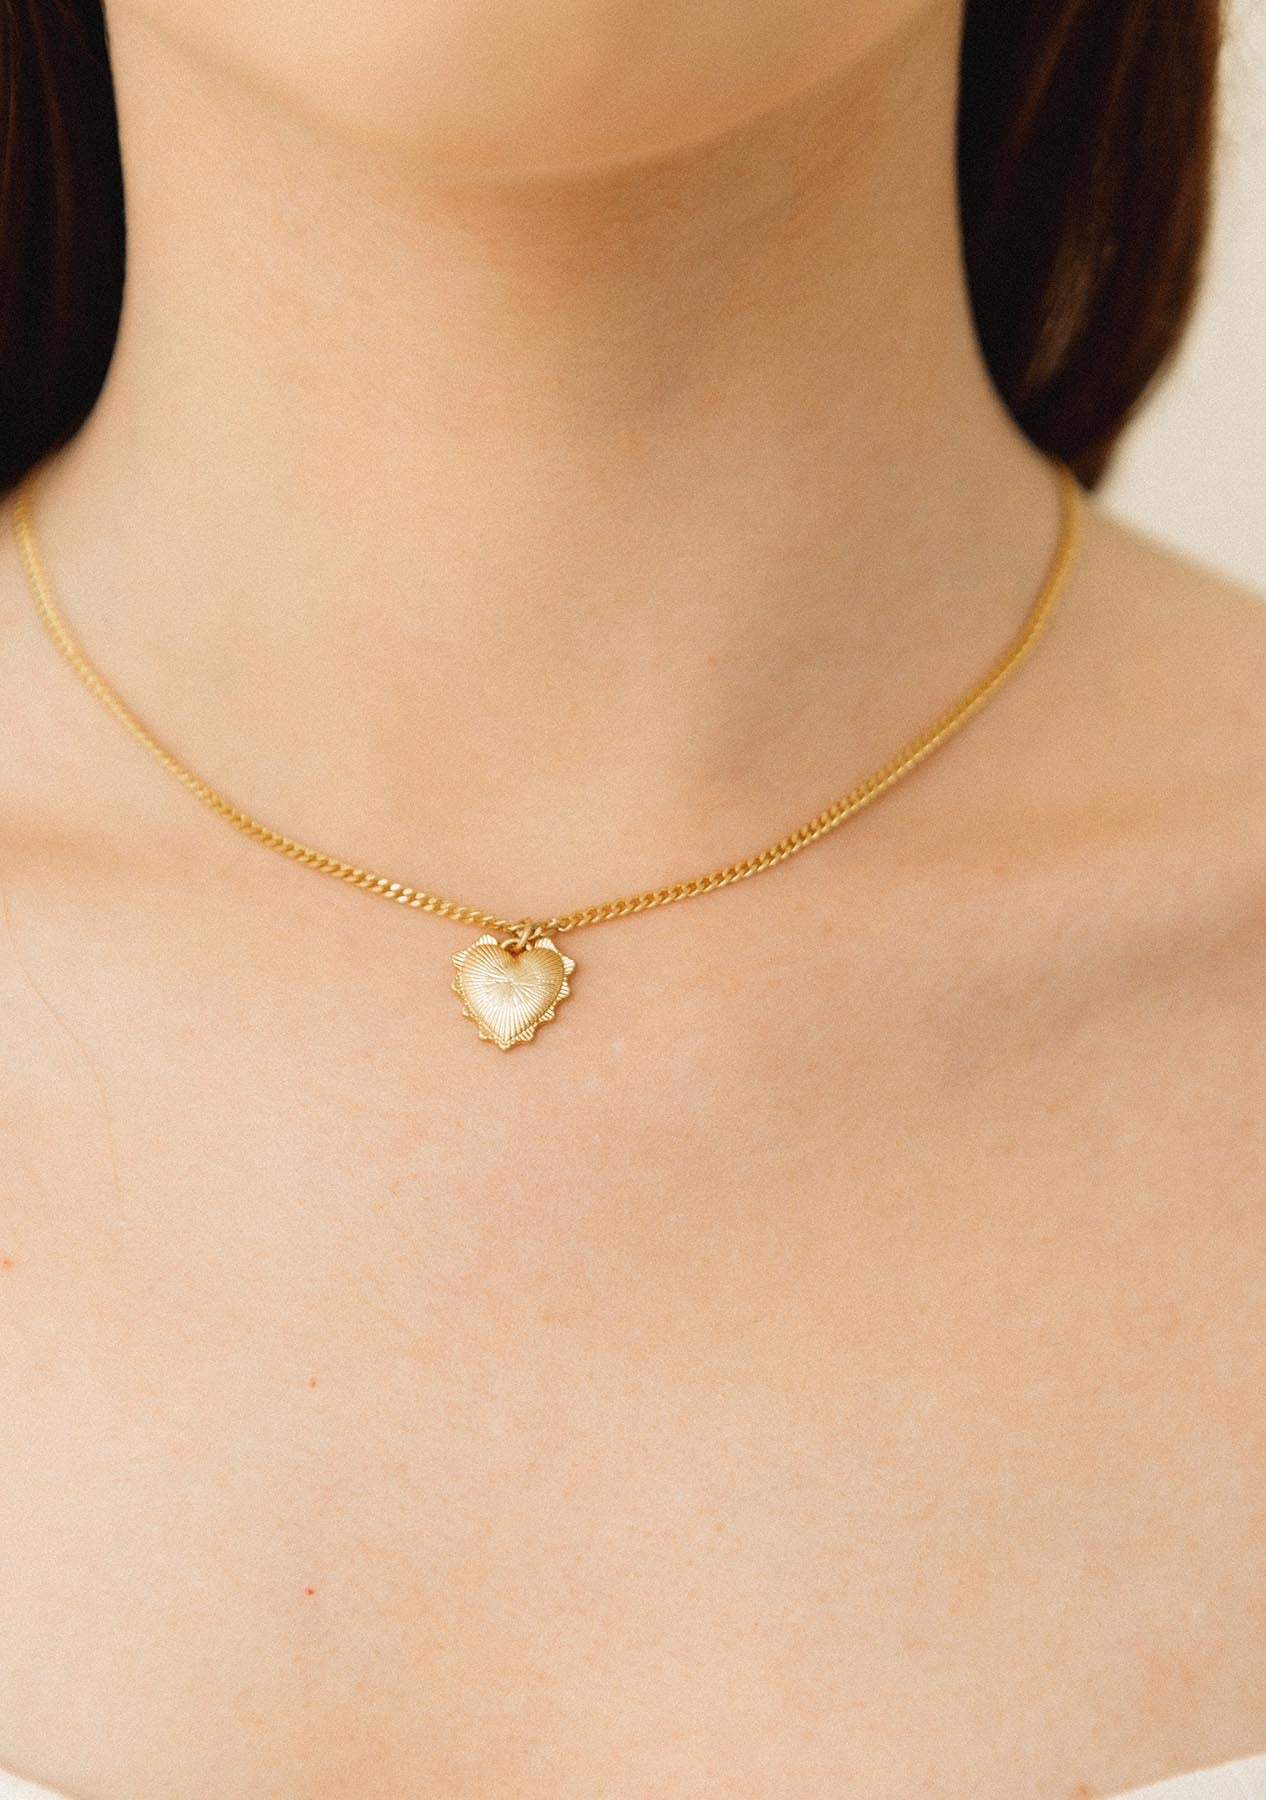 Gold Chain Necklace w Heart